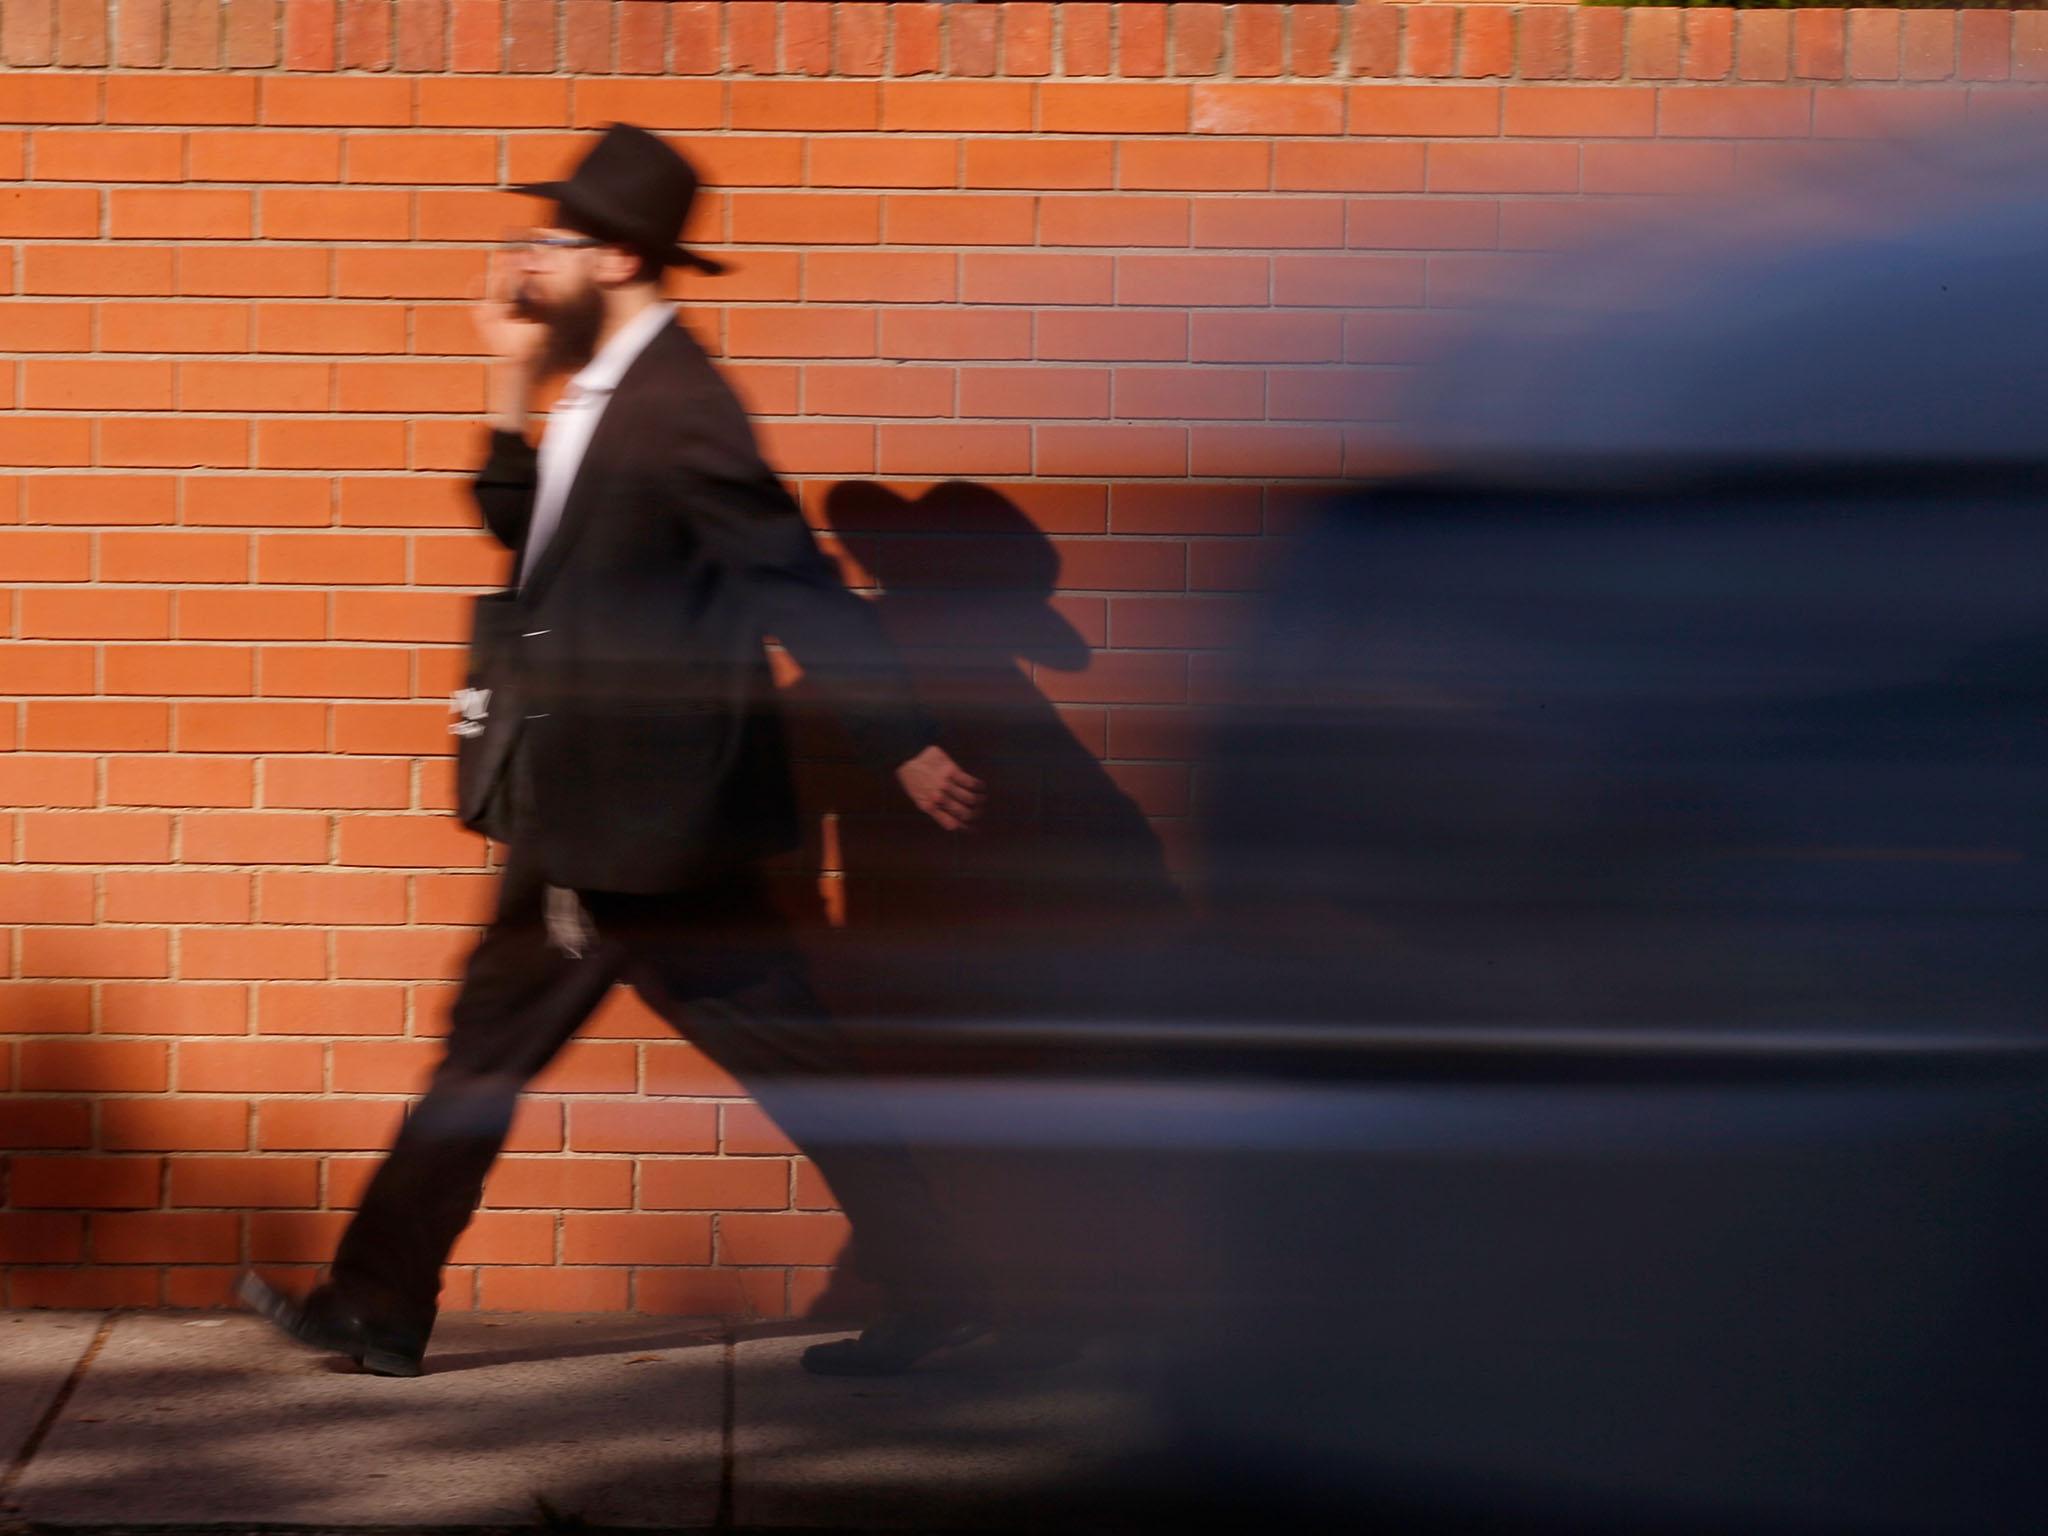 An Orthodox Jewish man walks along Hotham Street in St Kilda East, Melbourne. Approximately 120,000 Jews live in Australia today